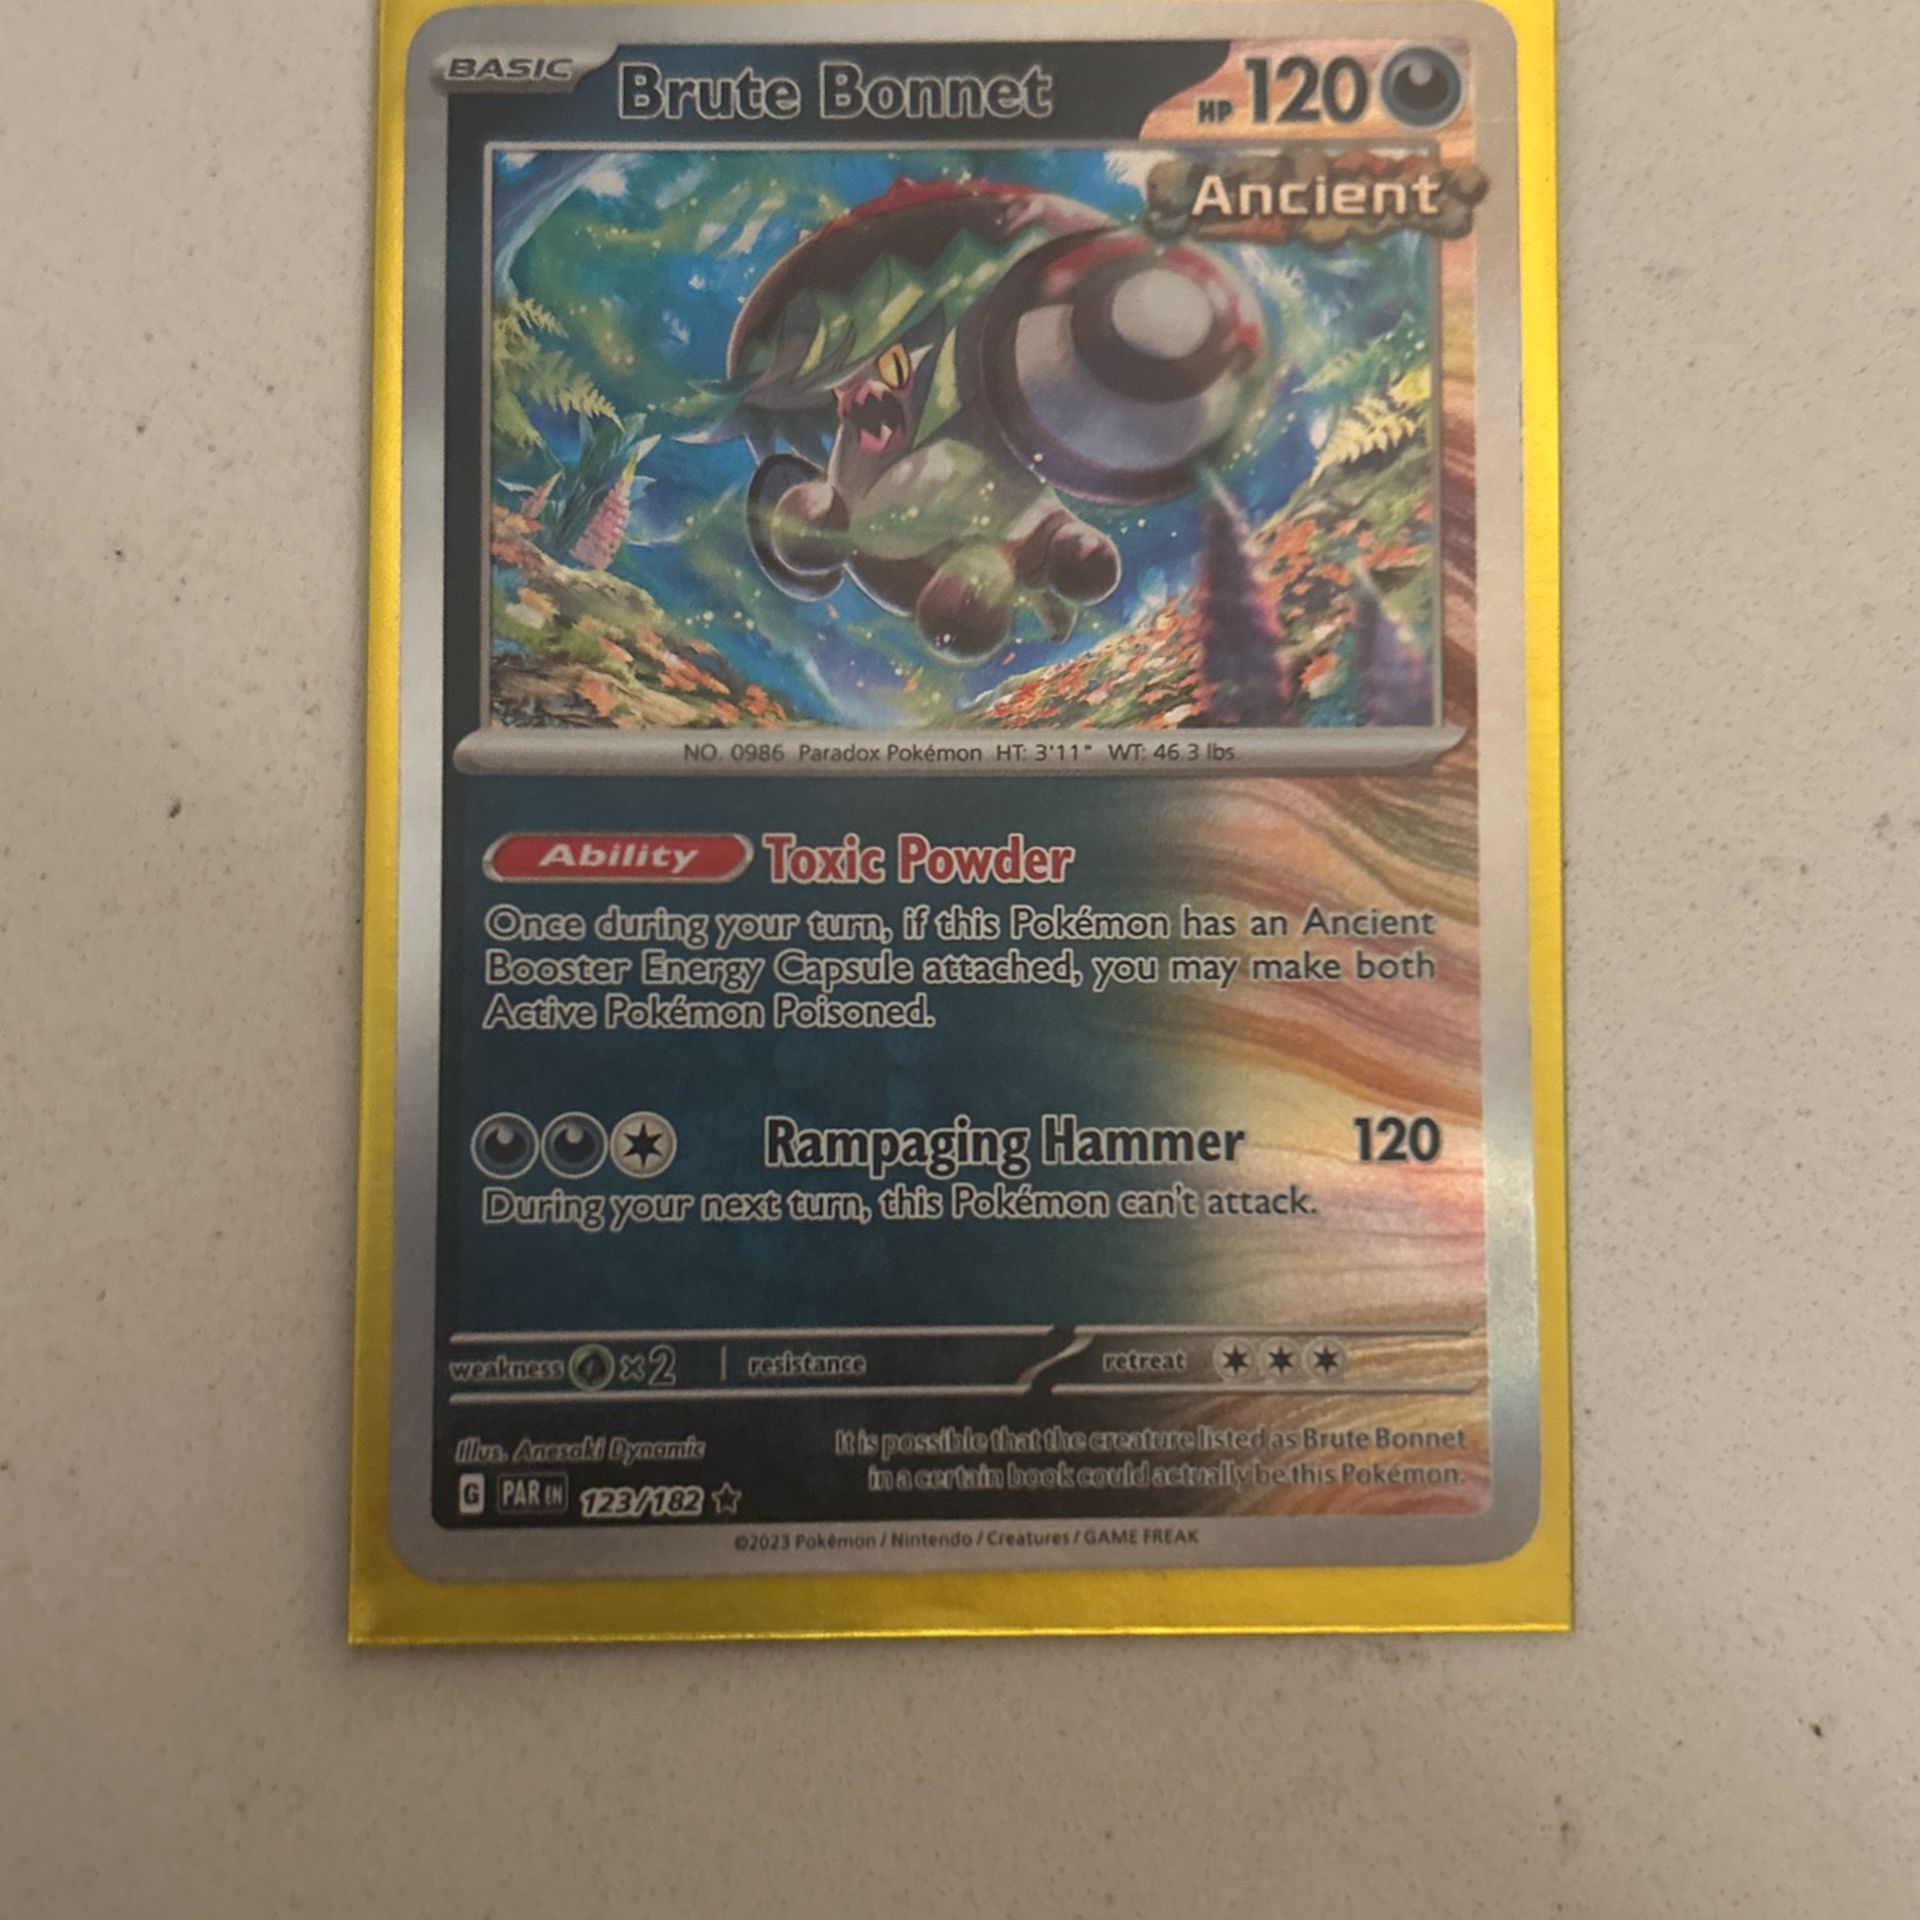 Brute Bonnet Pokémon Collectible Send An Offer Nothing Free